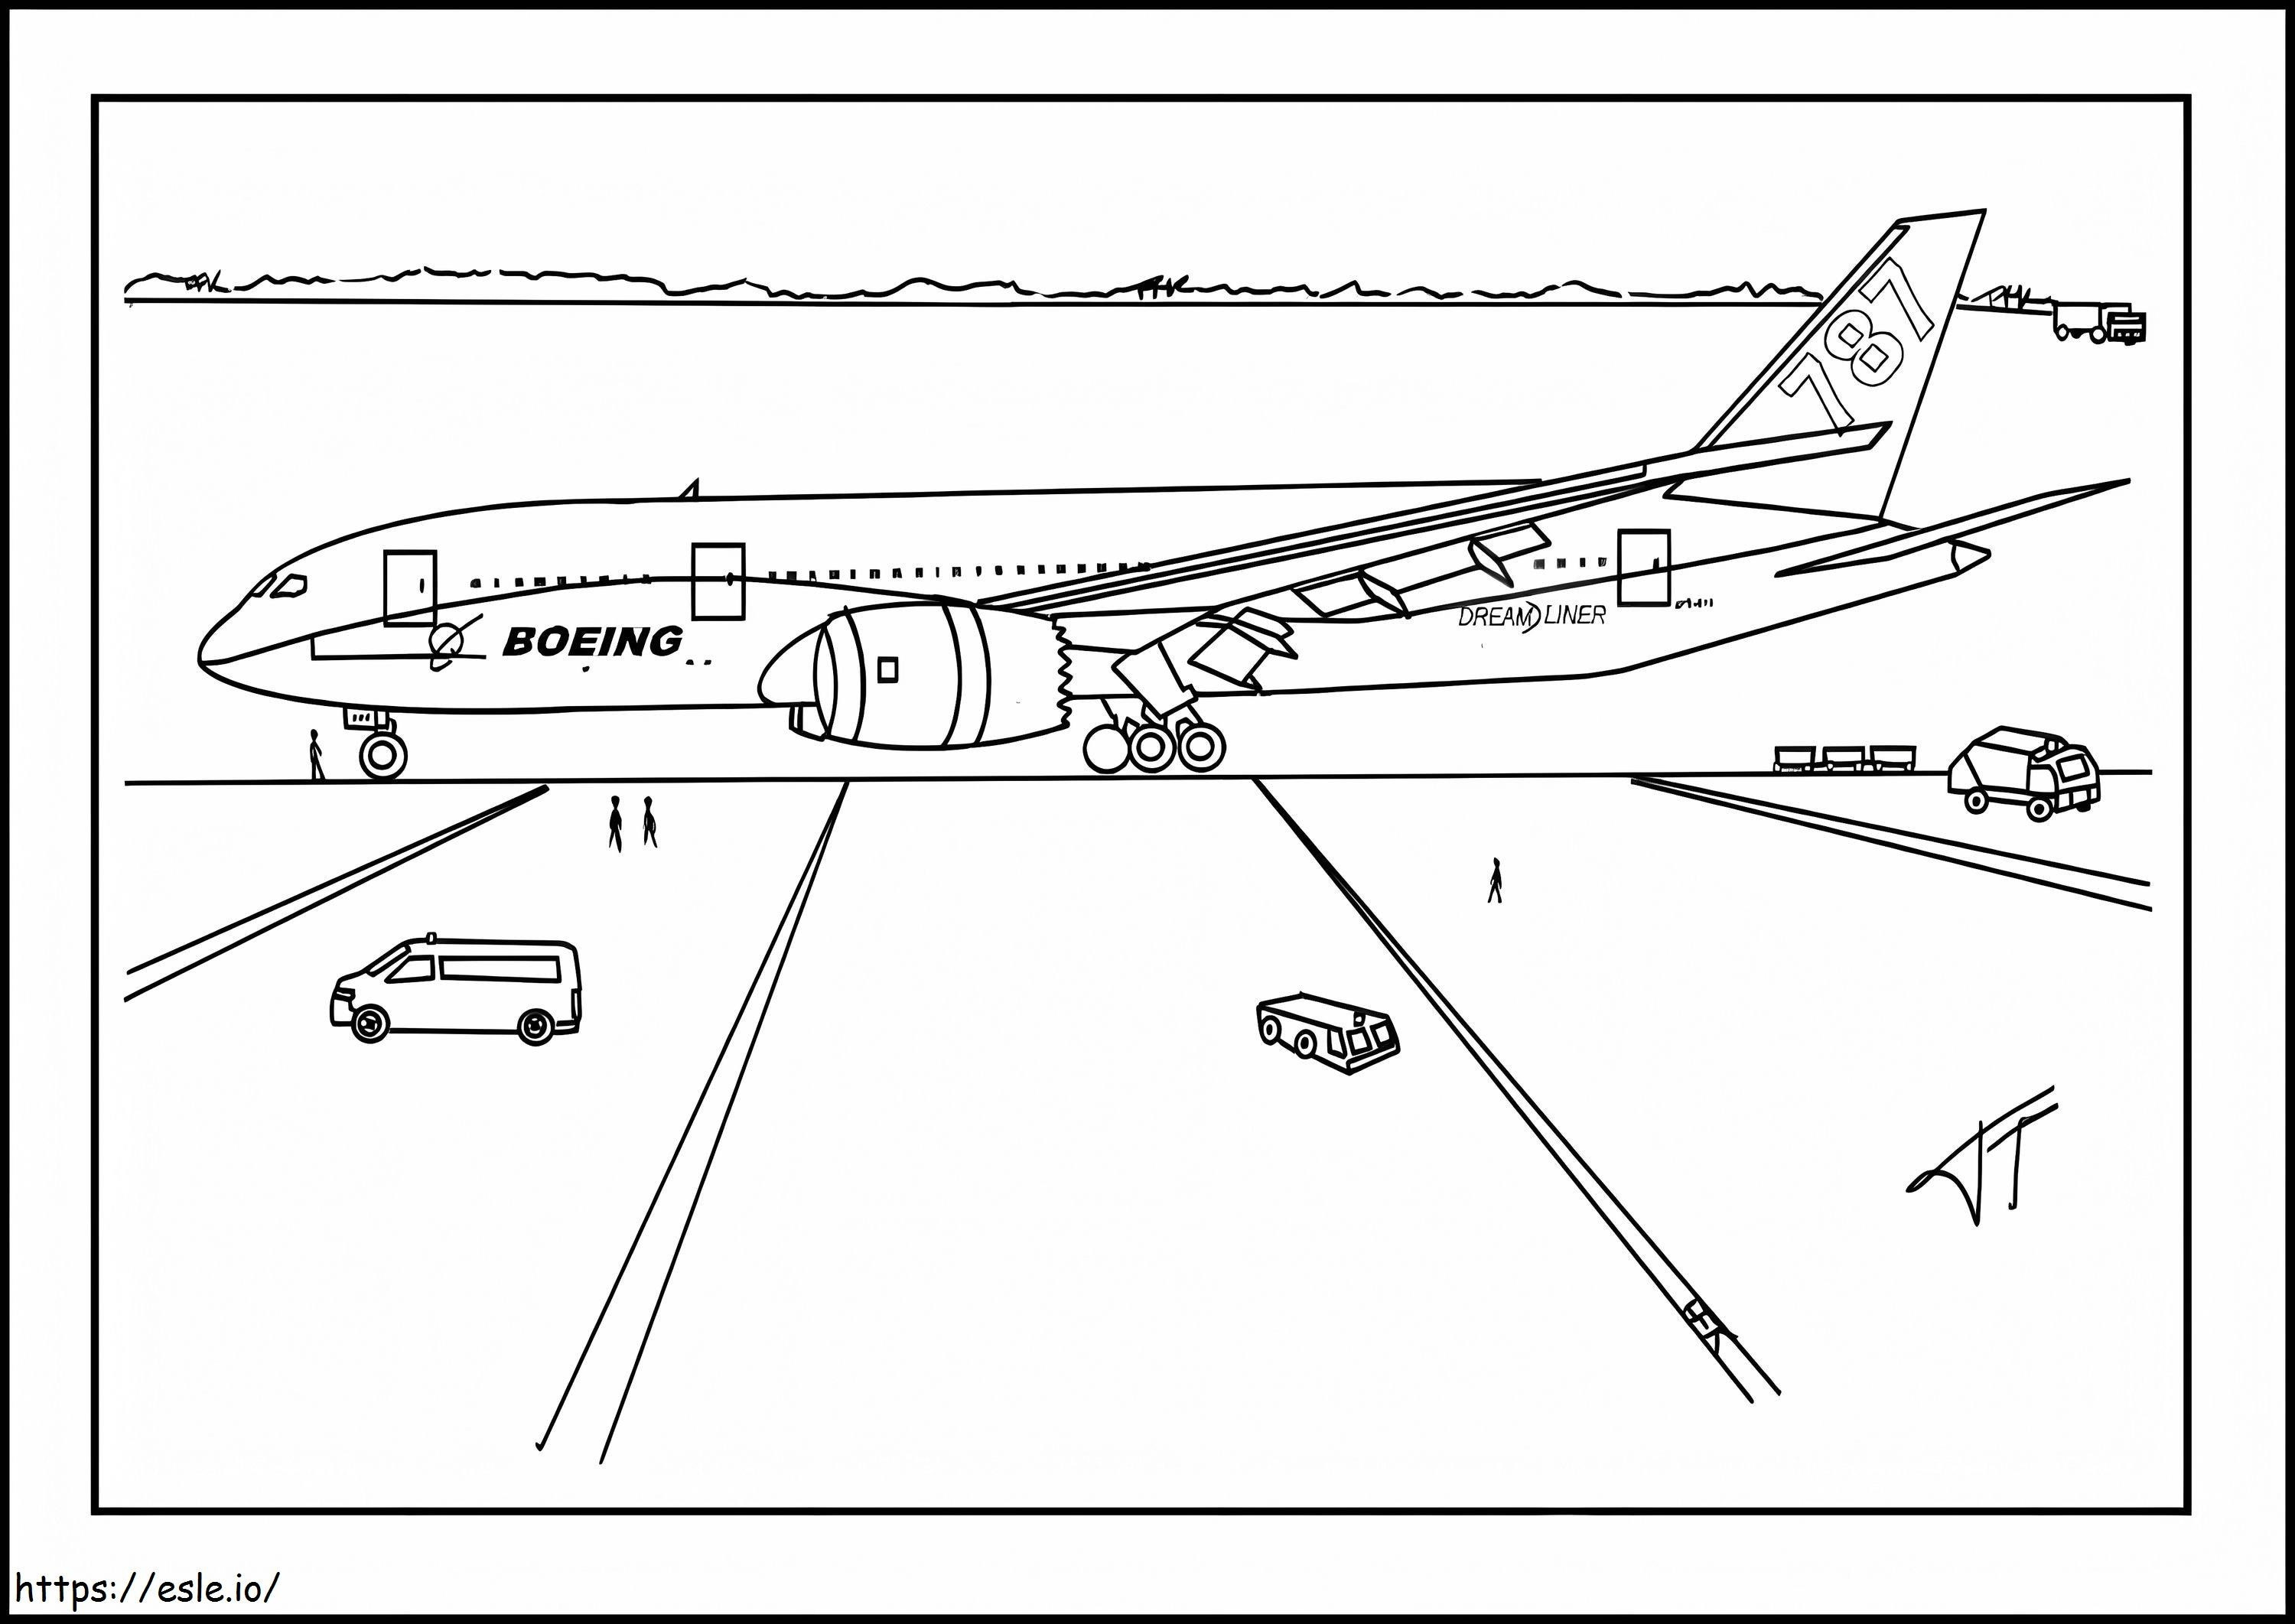 Plane At The Airport coloring page